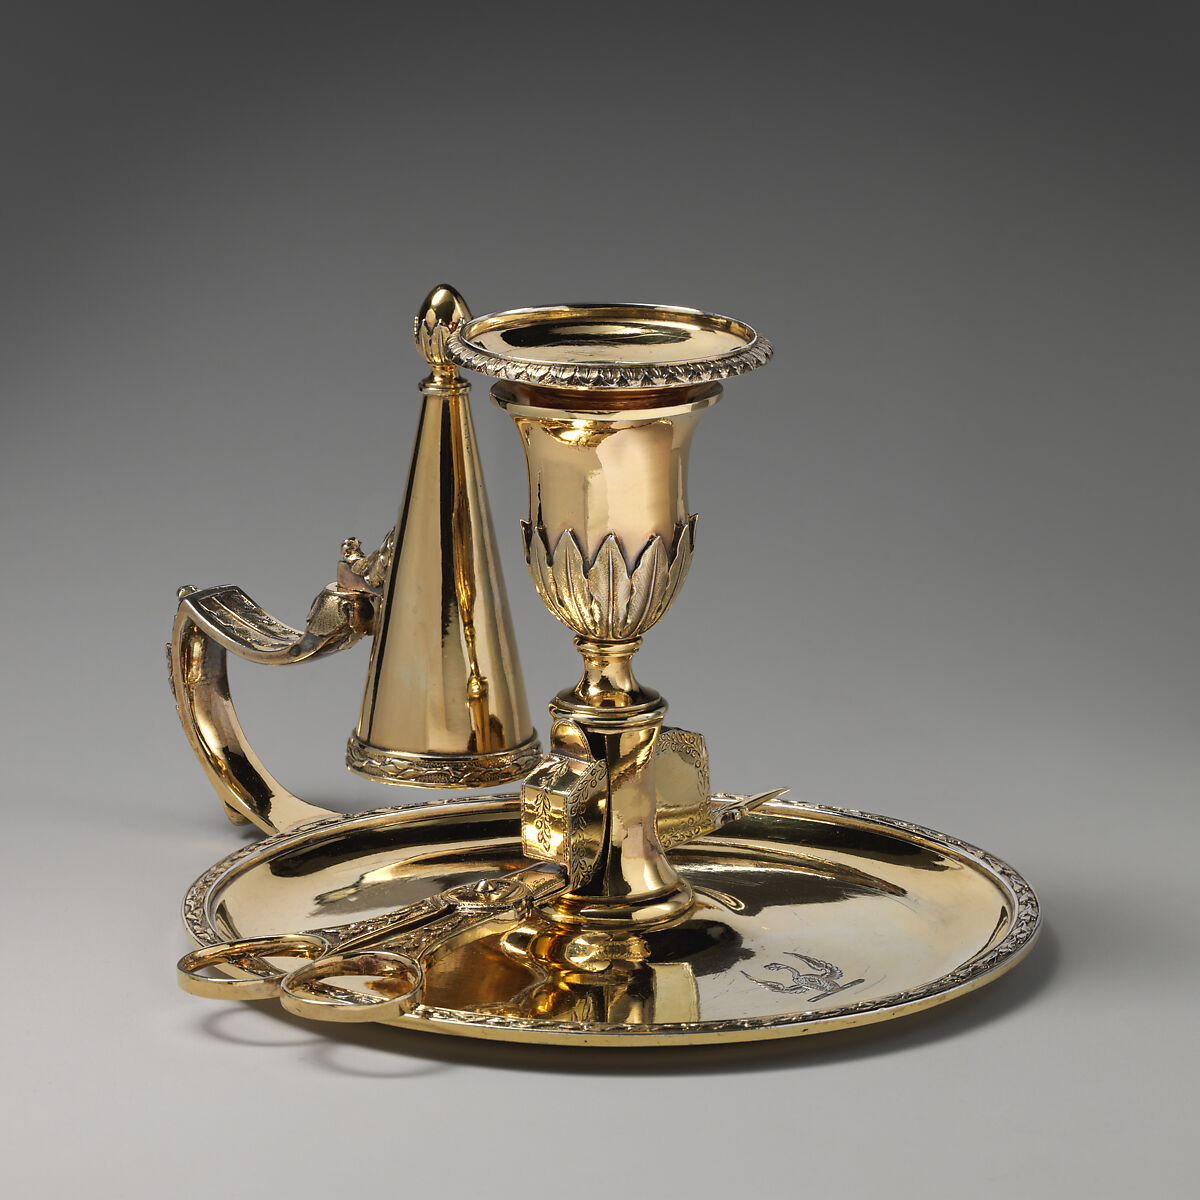 Chamberstick with snuffers (one of a pair), John Scofield (British, active 1776–96), Gilded silver, British, London 